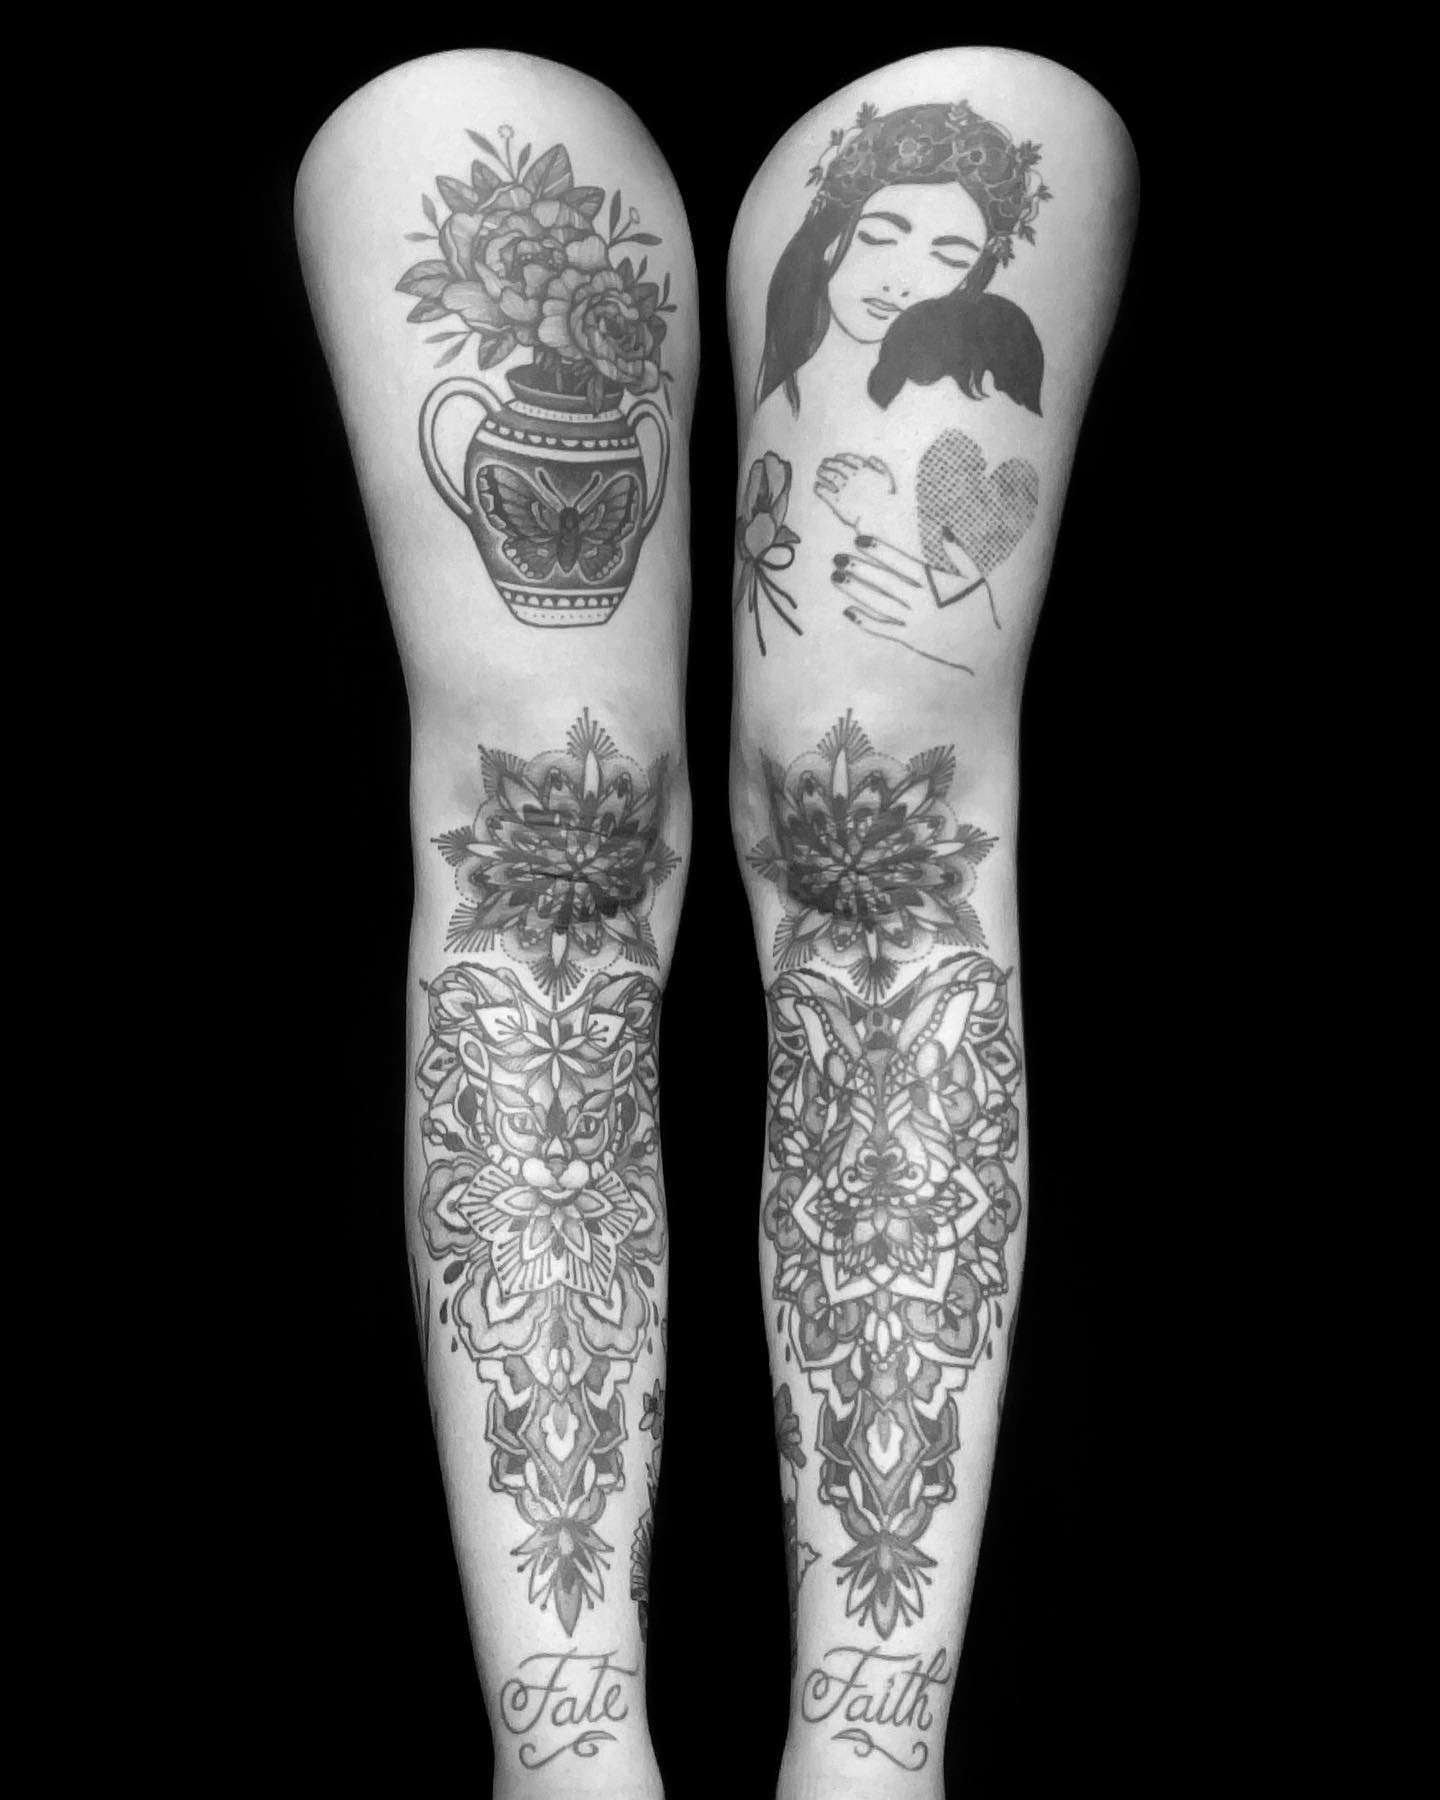 The Best Knee Tattoo Ideas: Most Popular Designs for 2021